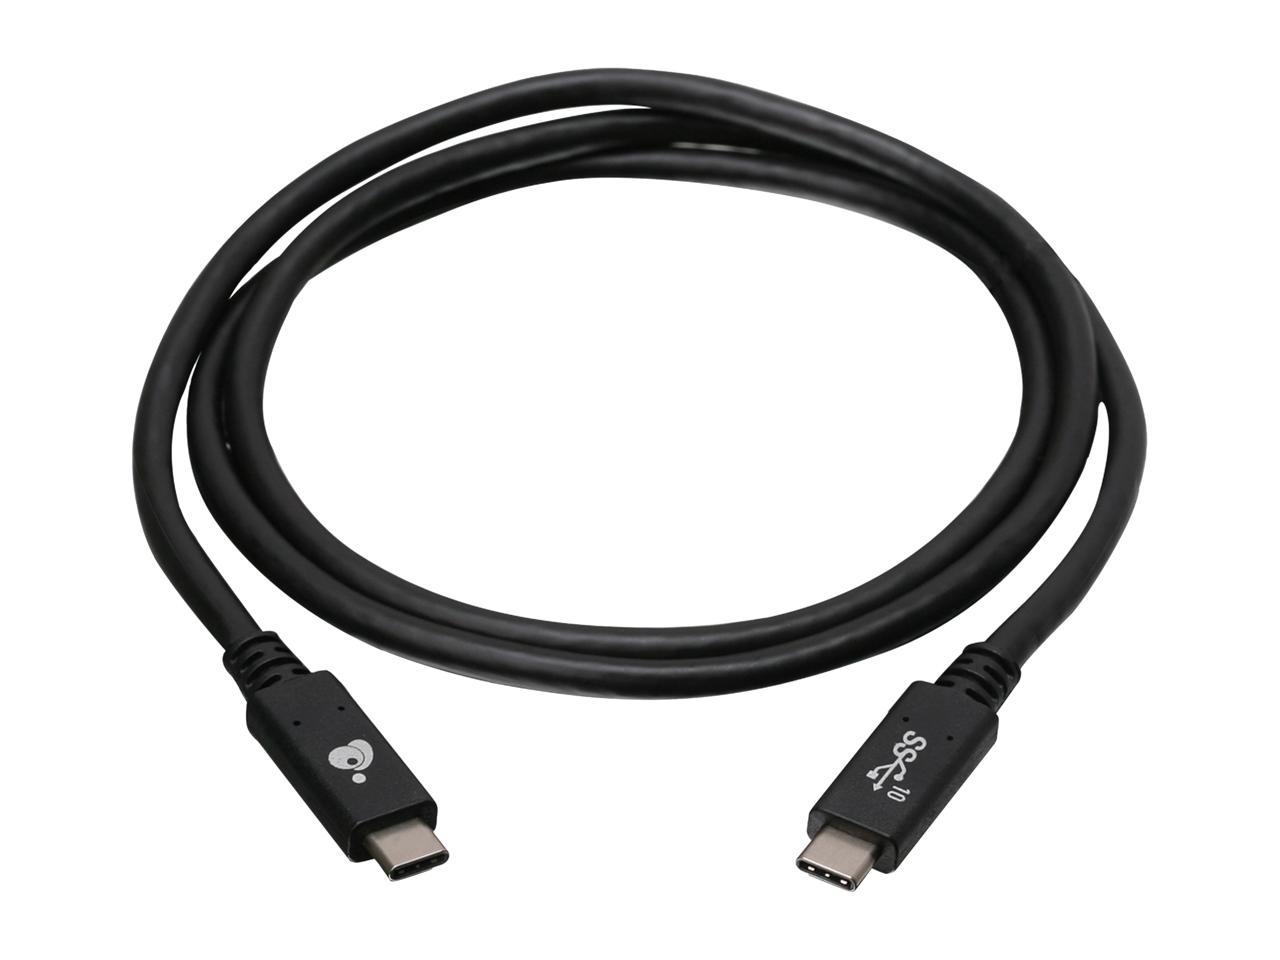 IOGEAR G2LU3CCM01E Black Smart USB-C to USB-C [USB-IF Certified] 10Gbps Cable with E-Marker